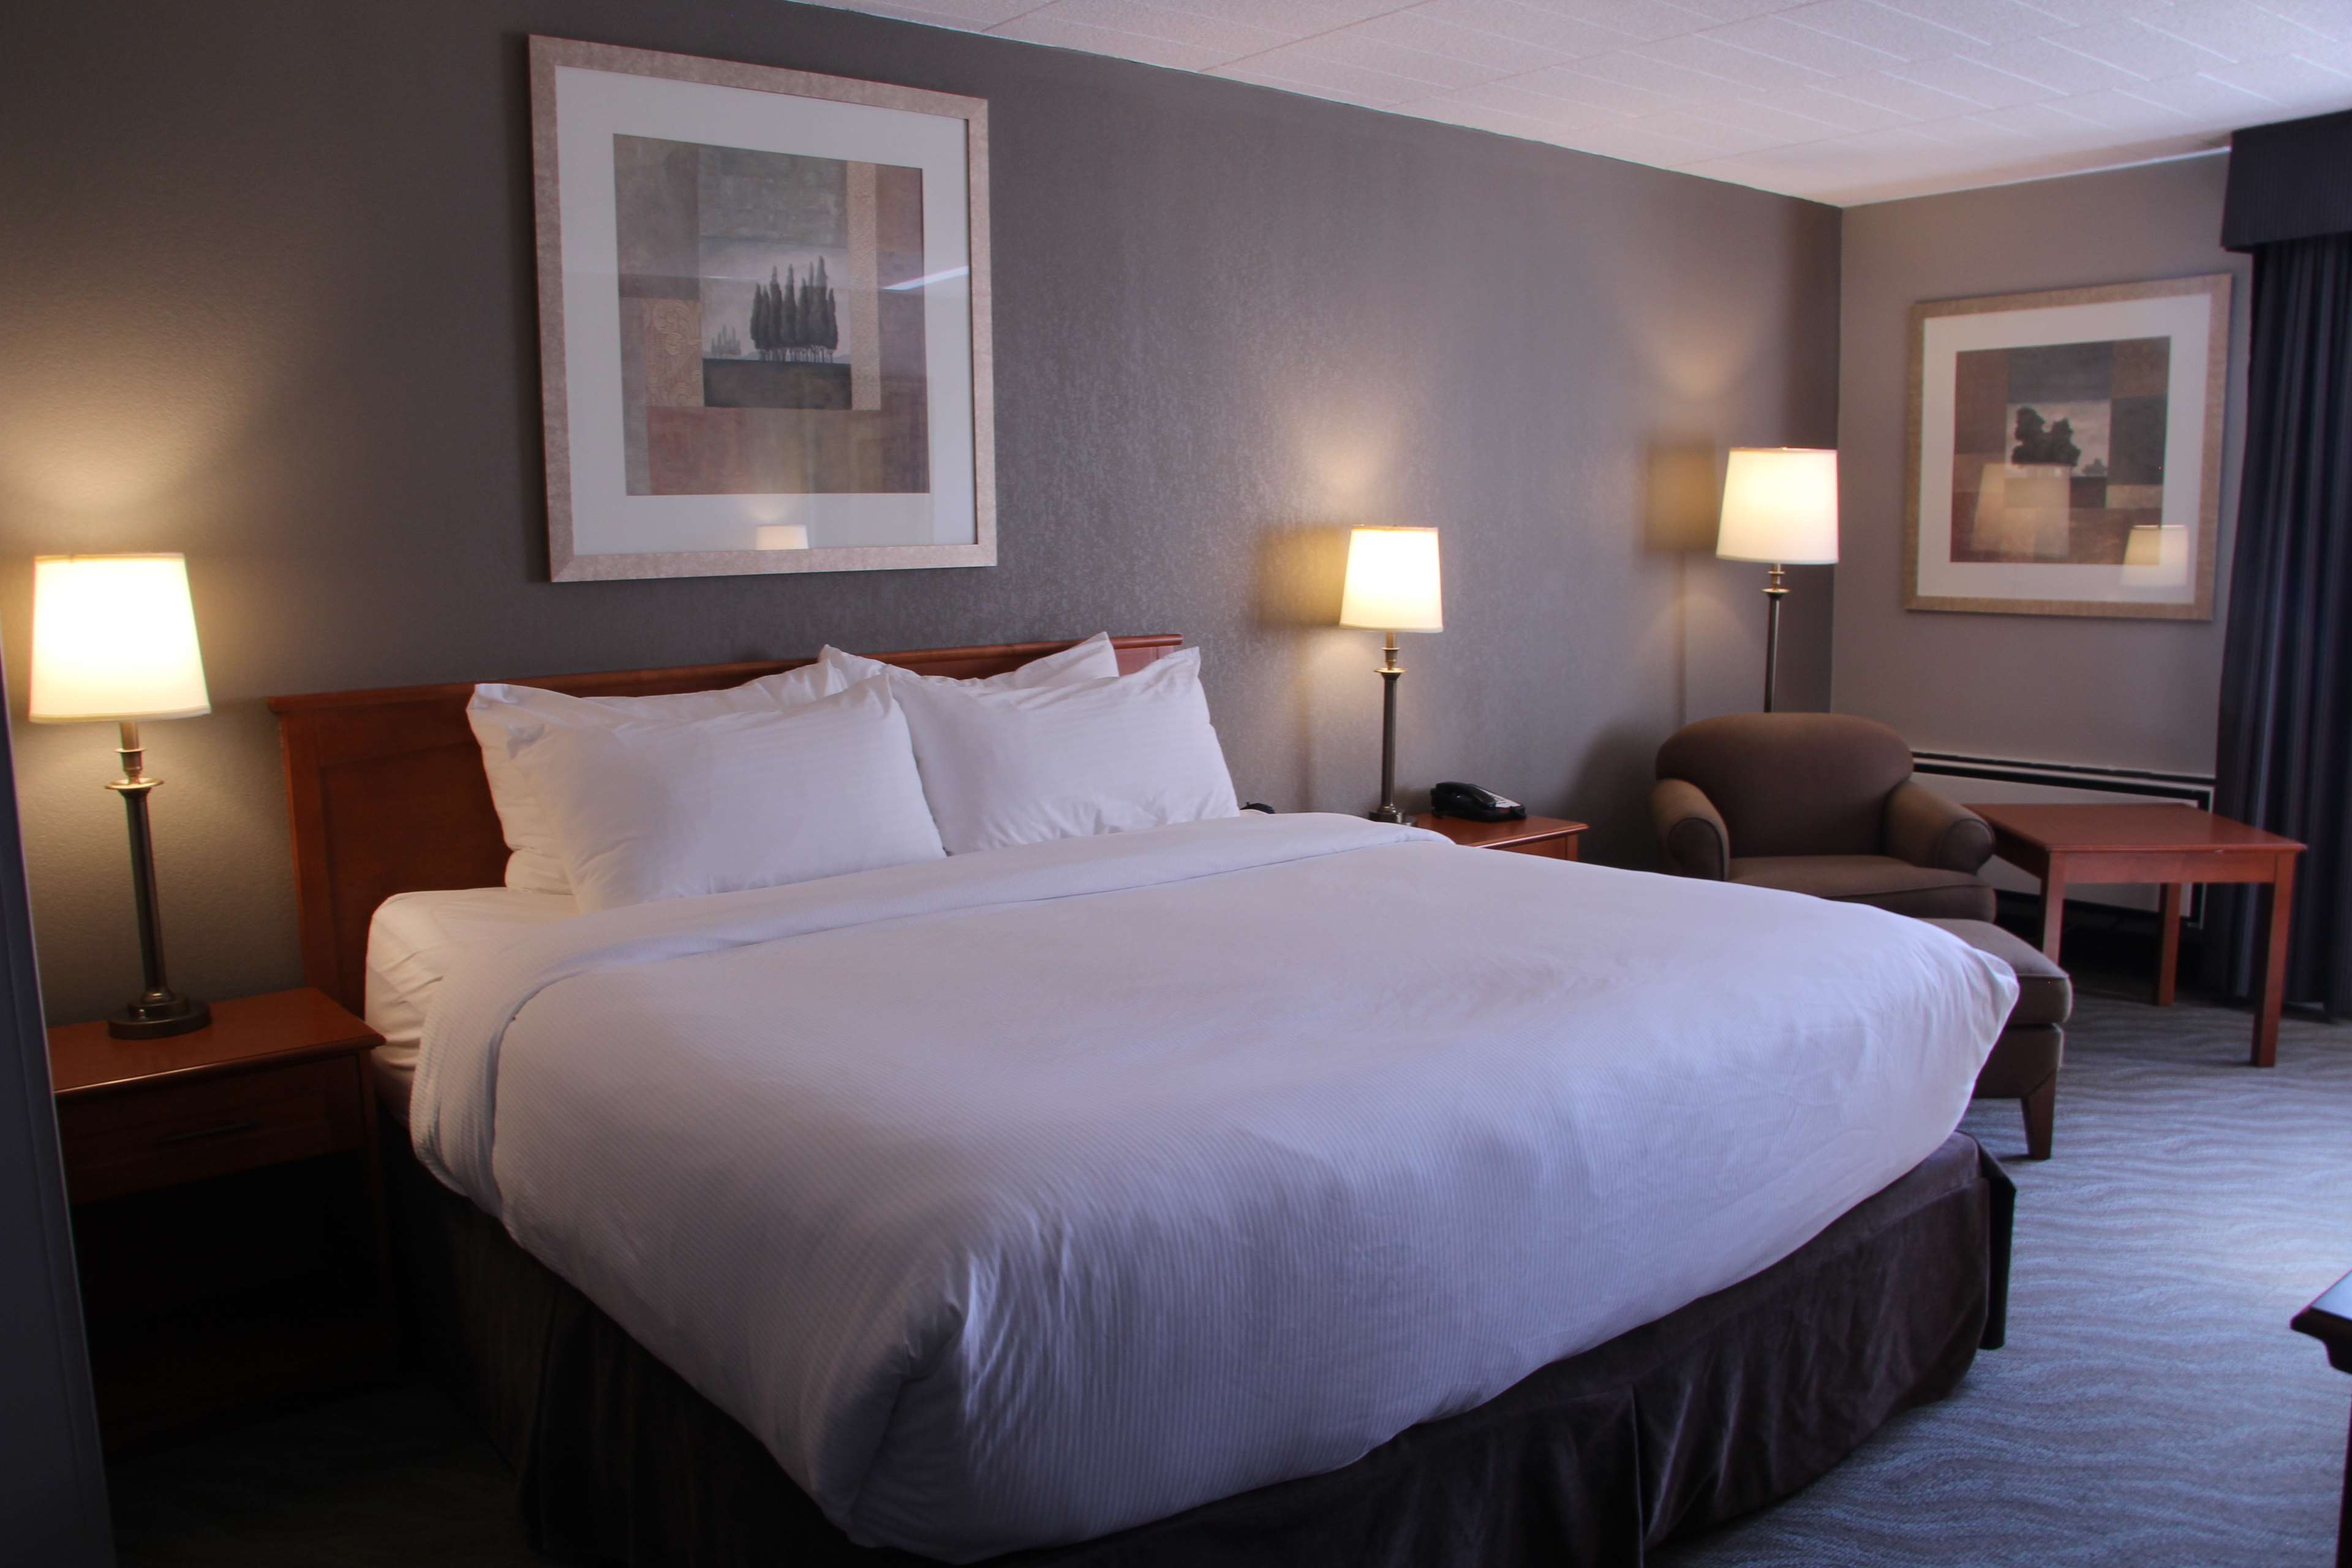 King Room Best Western North Bay Hotel & Conference Centre North Bay (705)474-5800